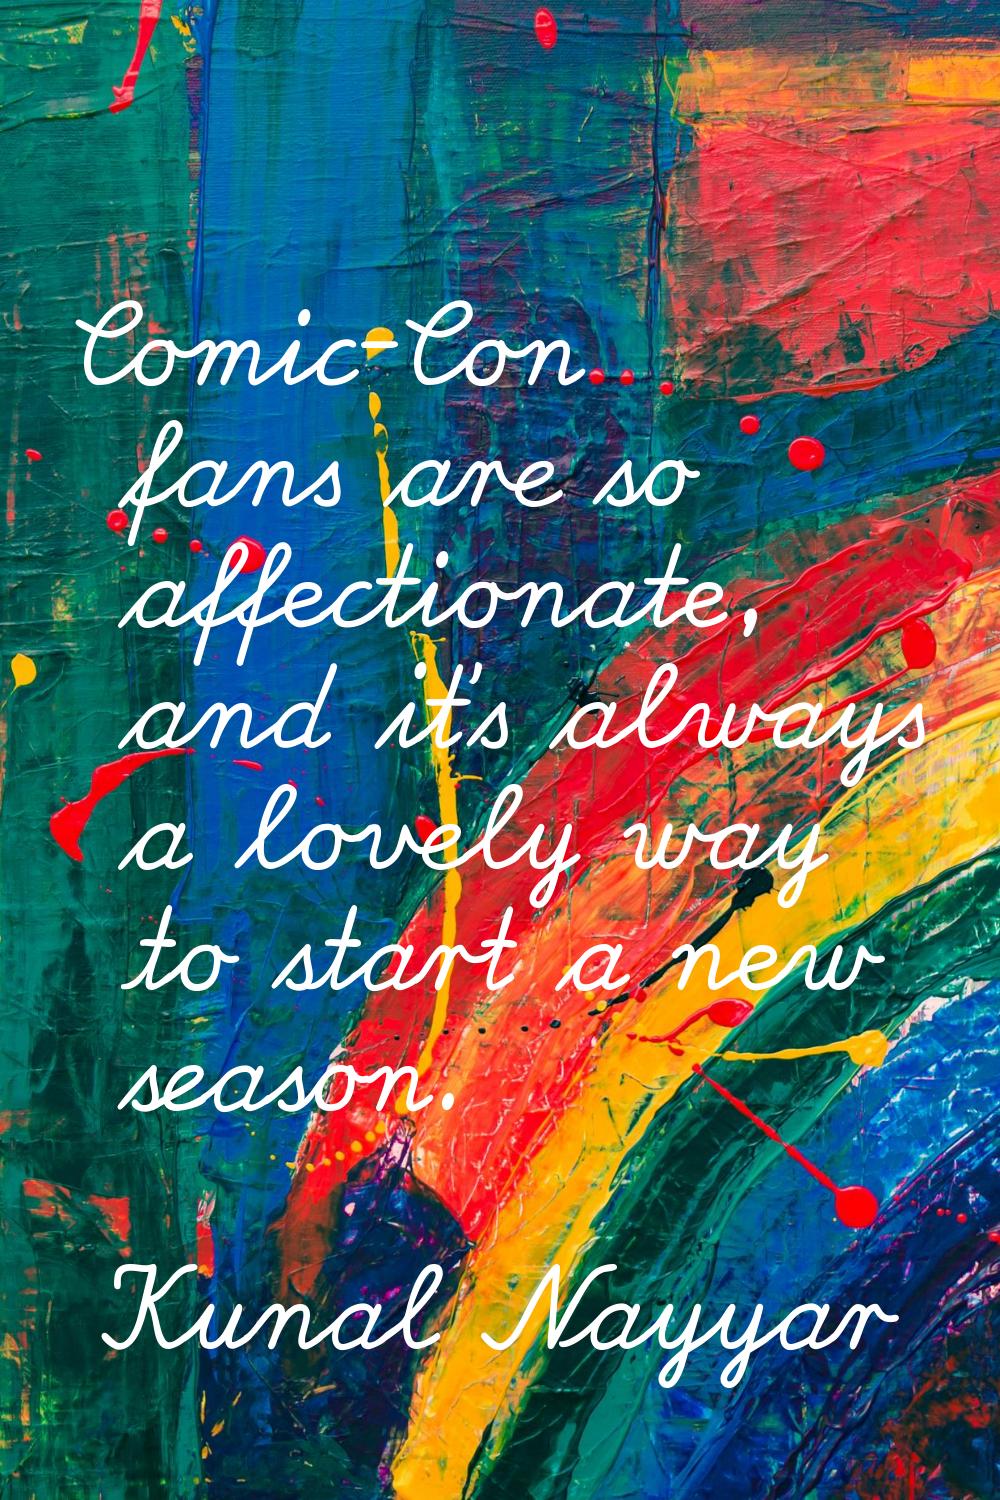 Comic-Con fans are so affectionate, and it's always a lovely way to start a new season.